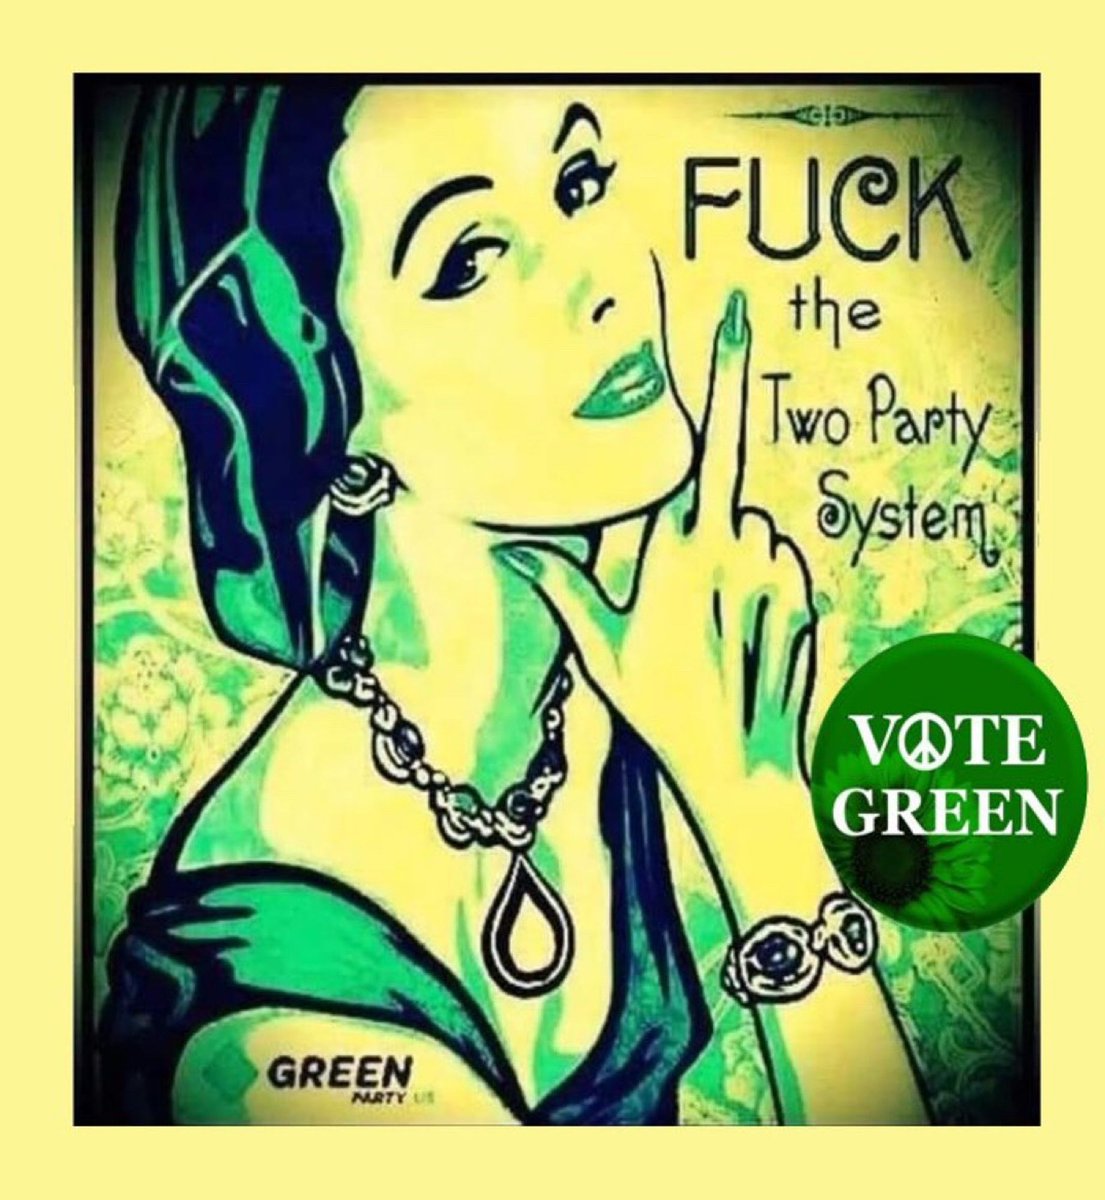 @DrJillStein @CBSNews @YouGov Voting the same-old same-old has gotten the country into the mess we're in. Time to break the duopoly, end the funding of genocide and the endless wars! #AbandonBiden #DumpTrump #VoteGreen